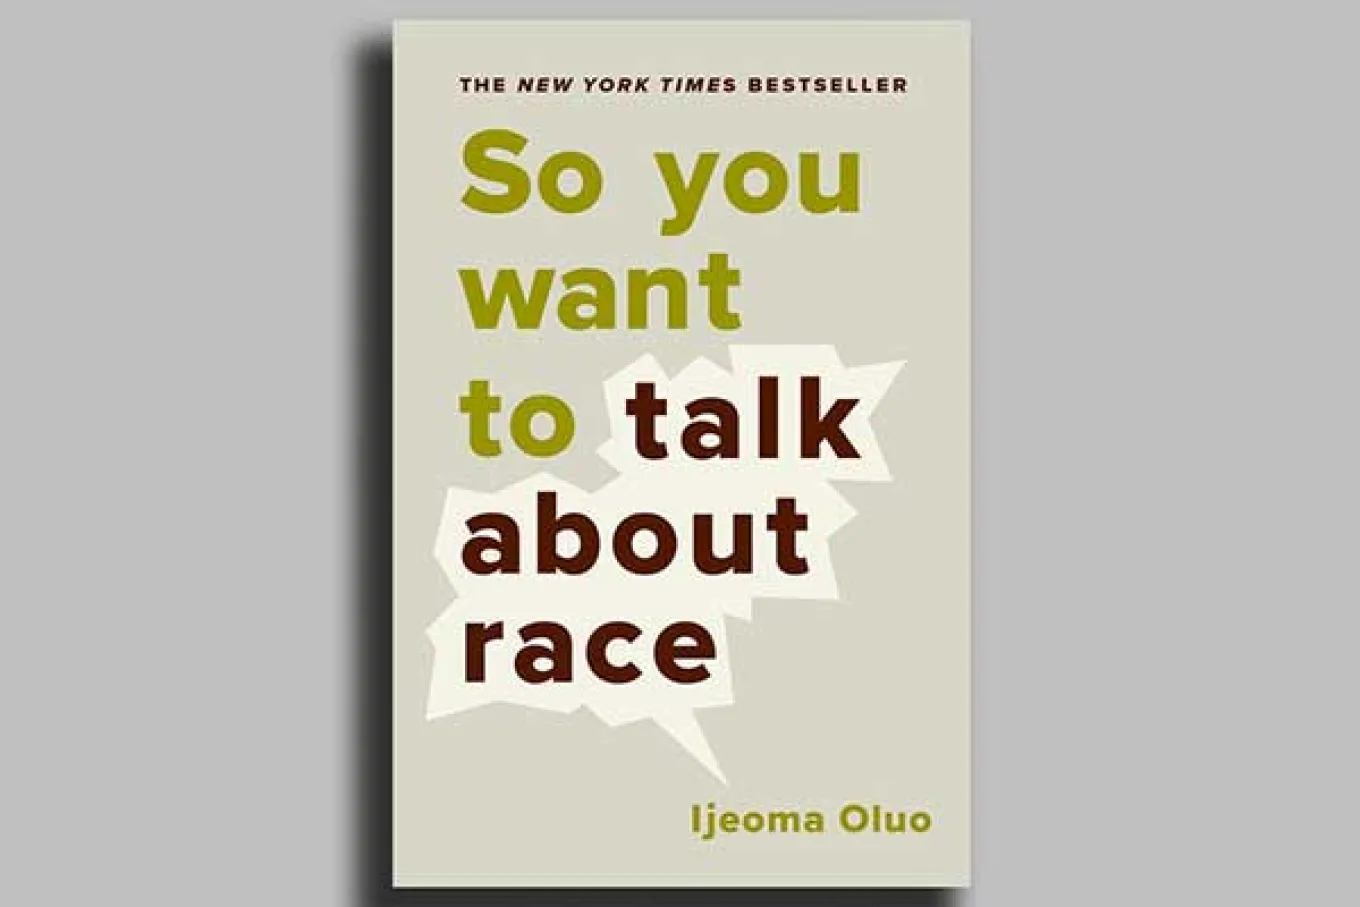 So You Want to Talk About Race